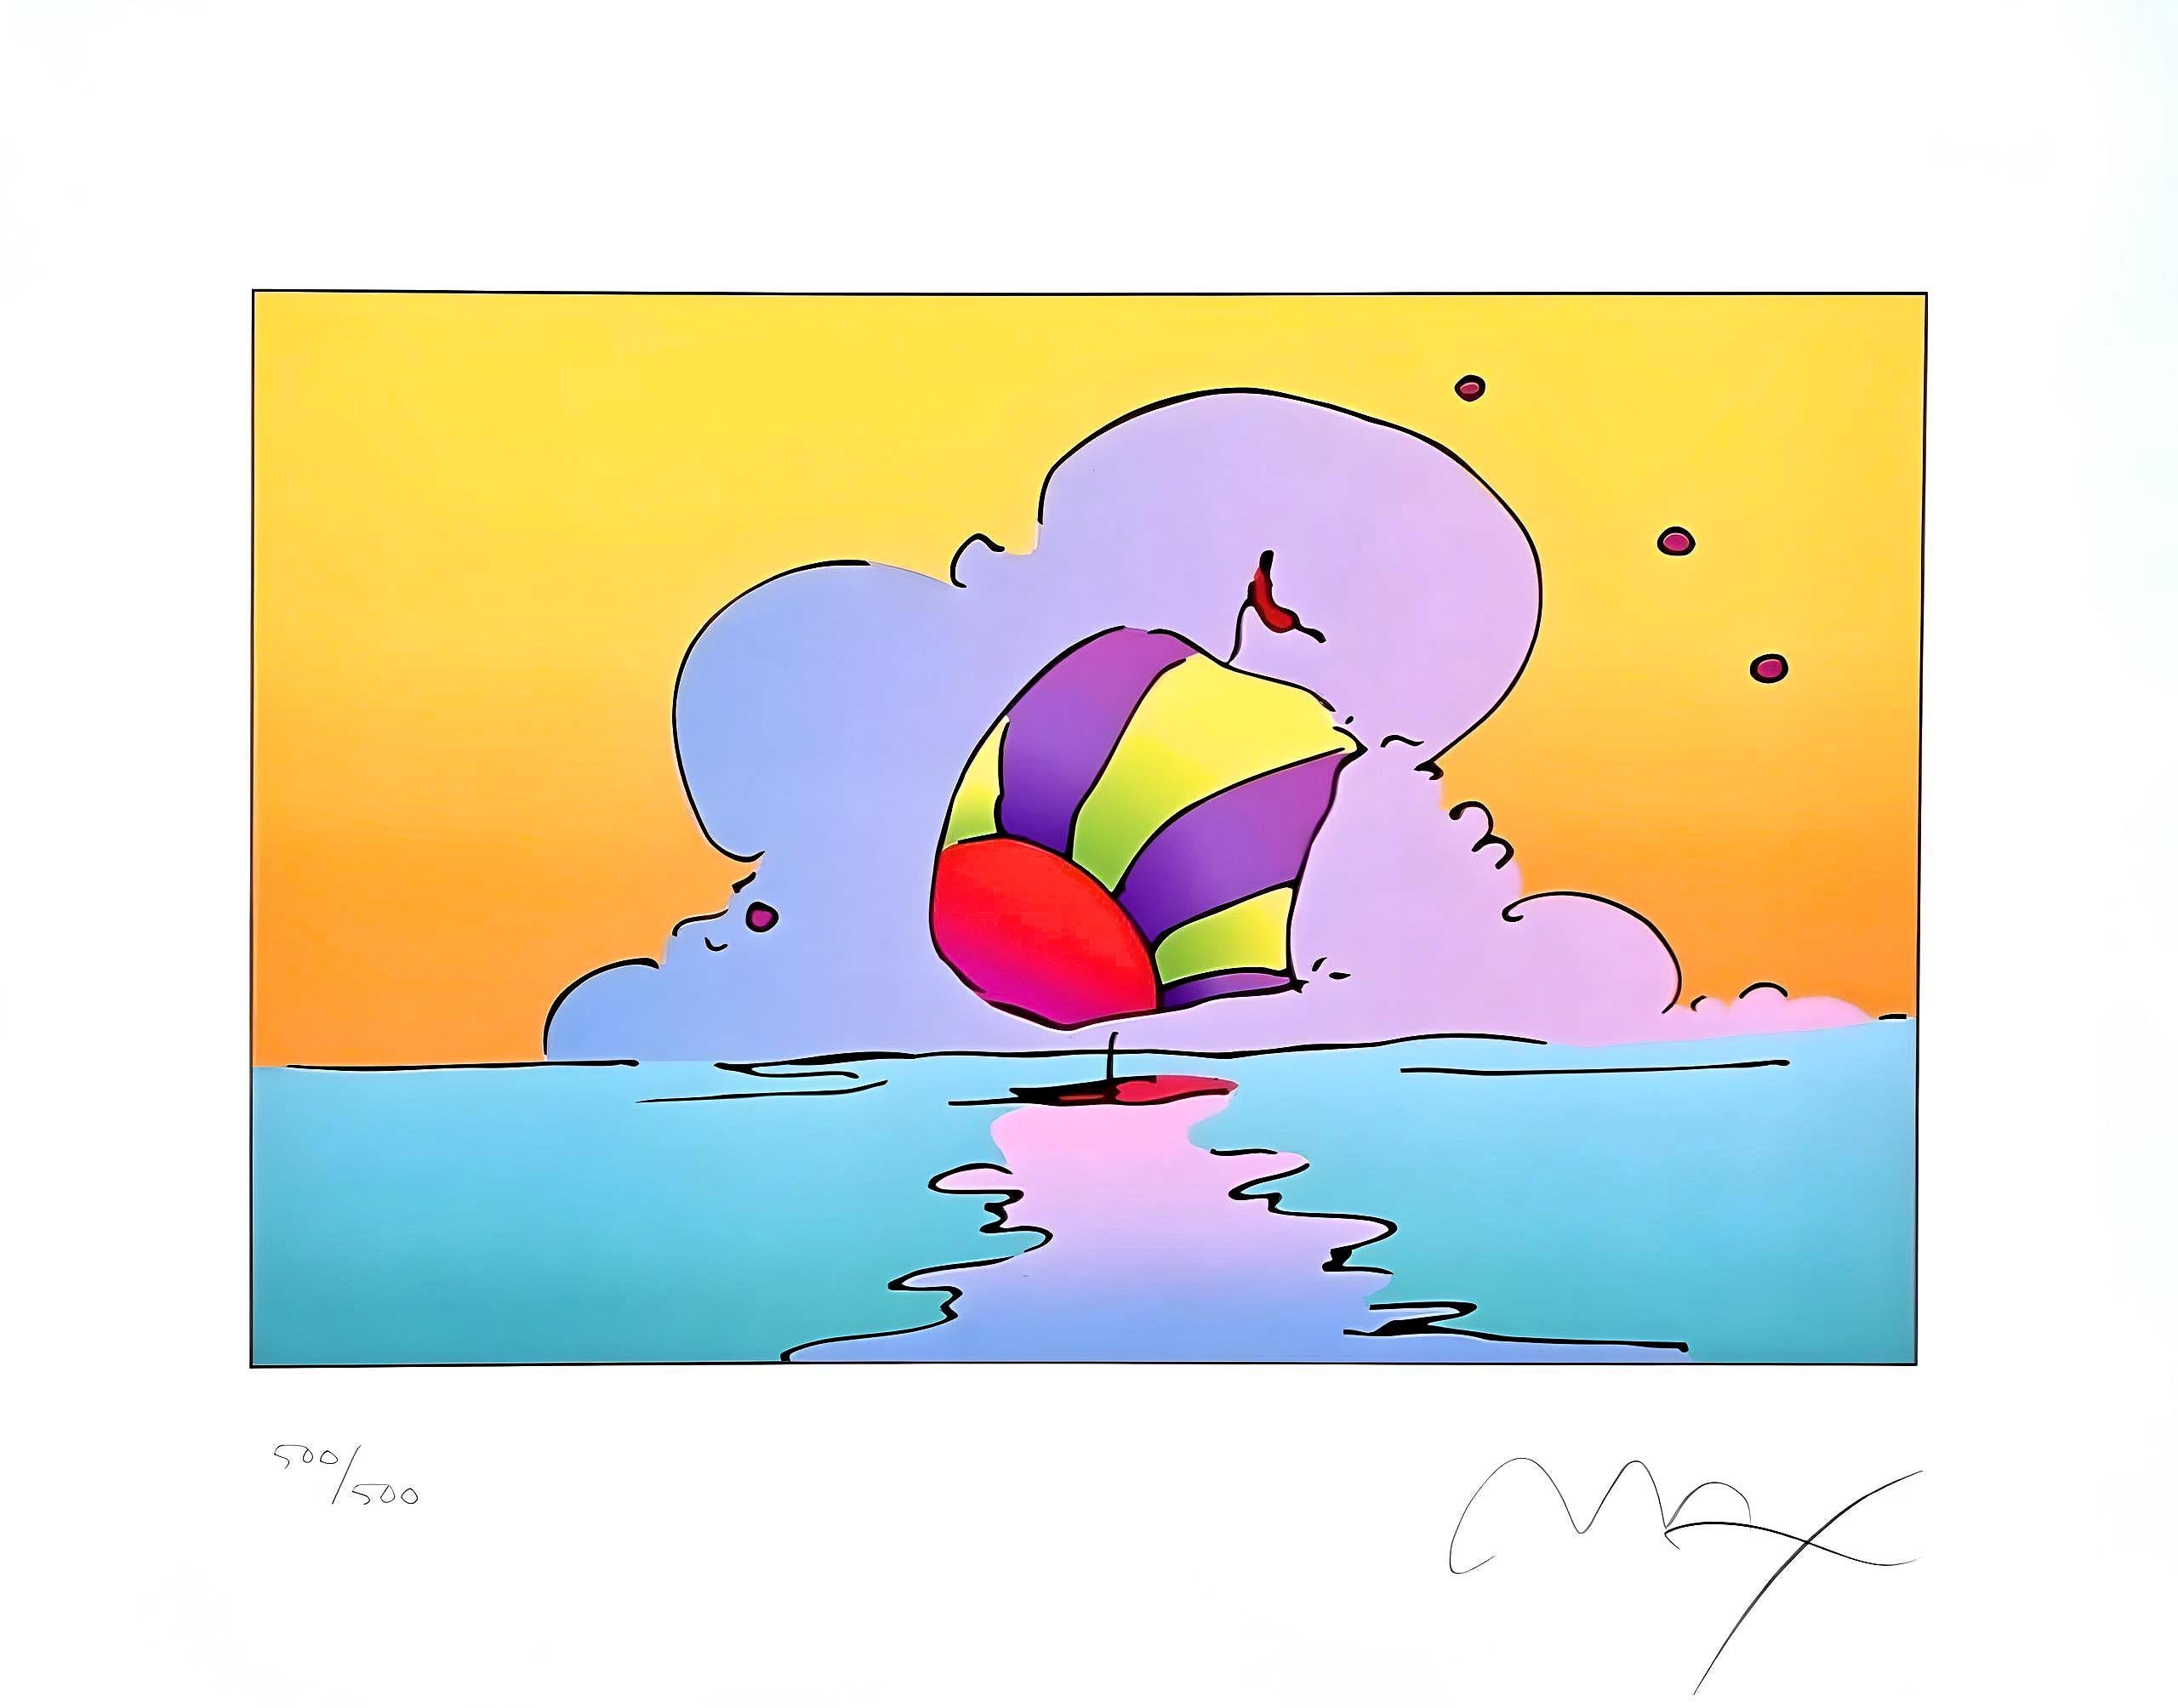 protect Our Future Ver. II, Peter Max im Angebot 6